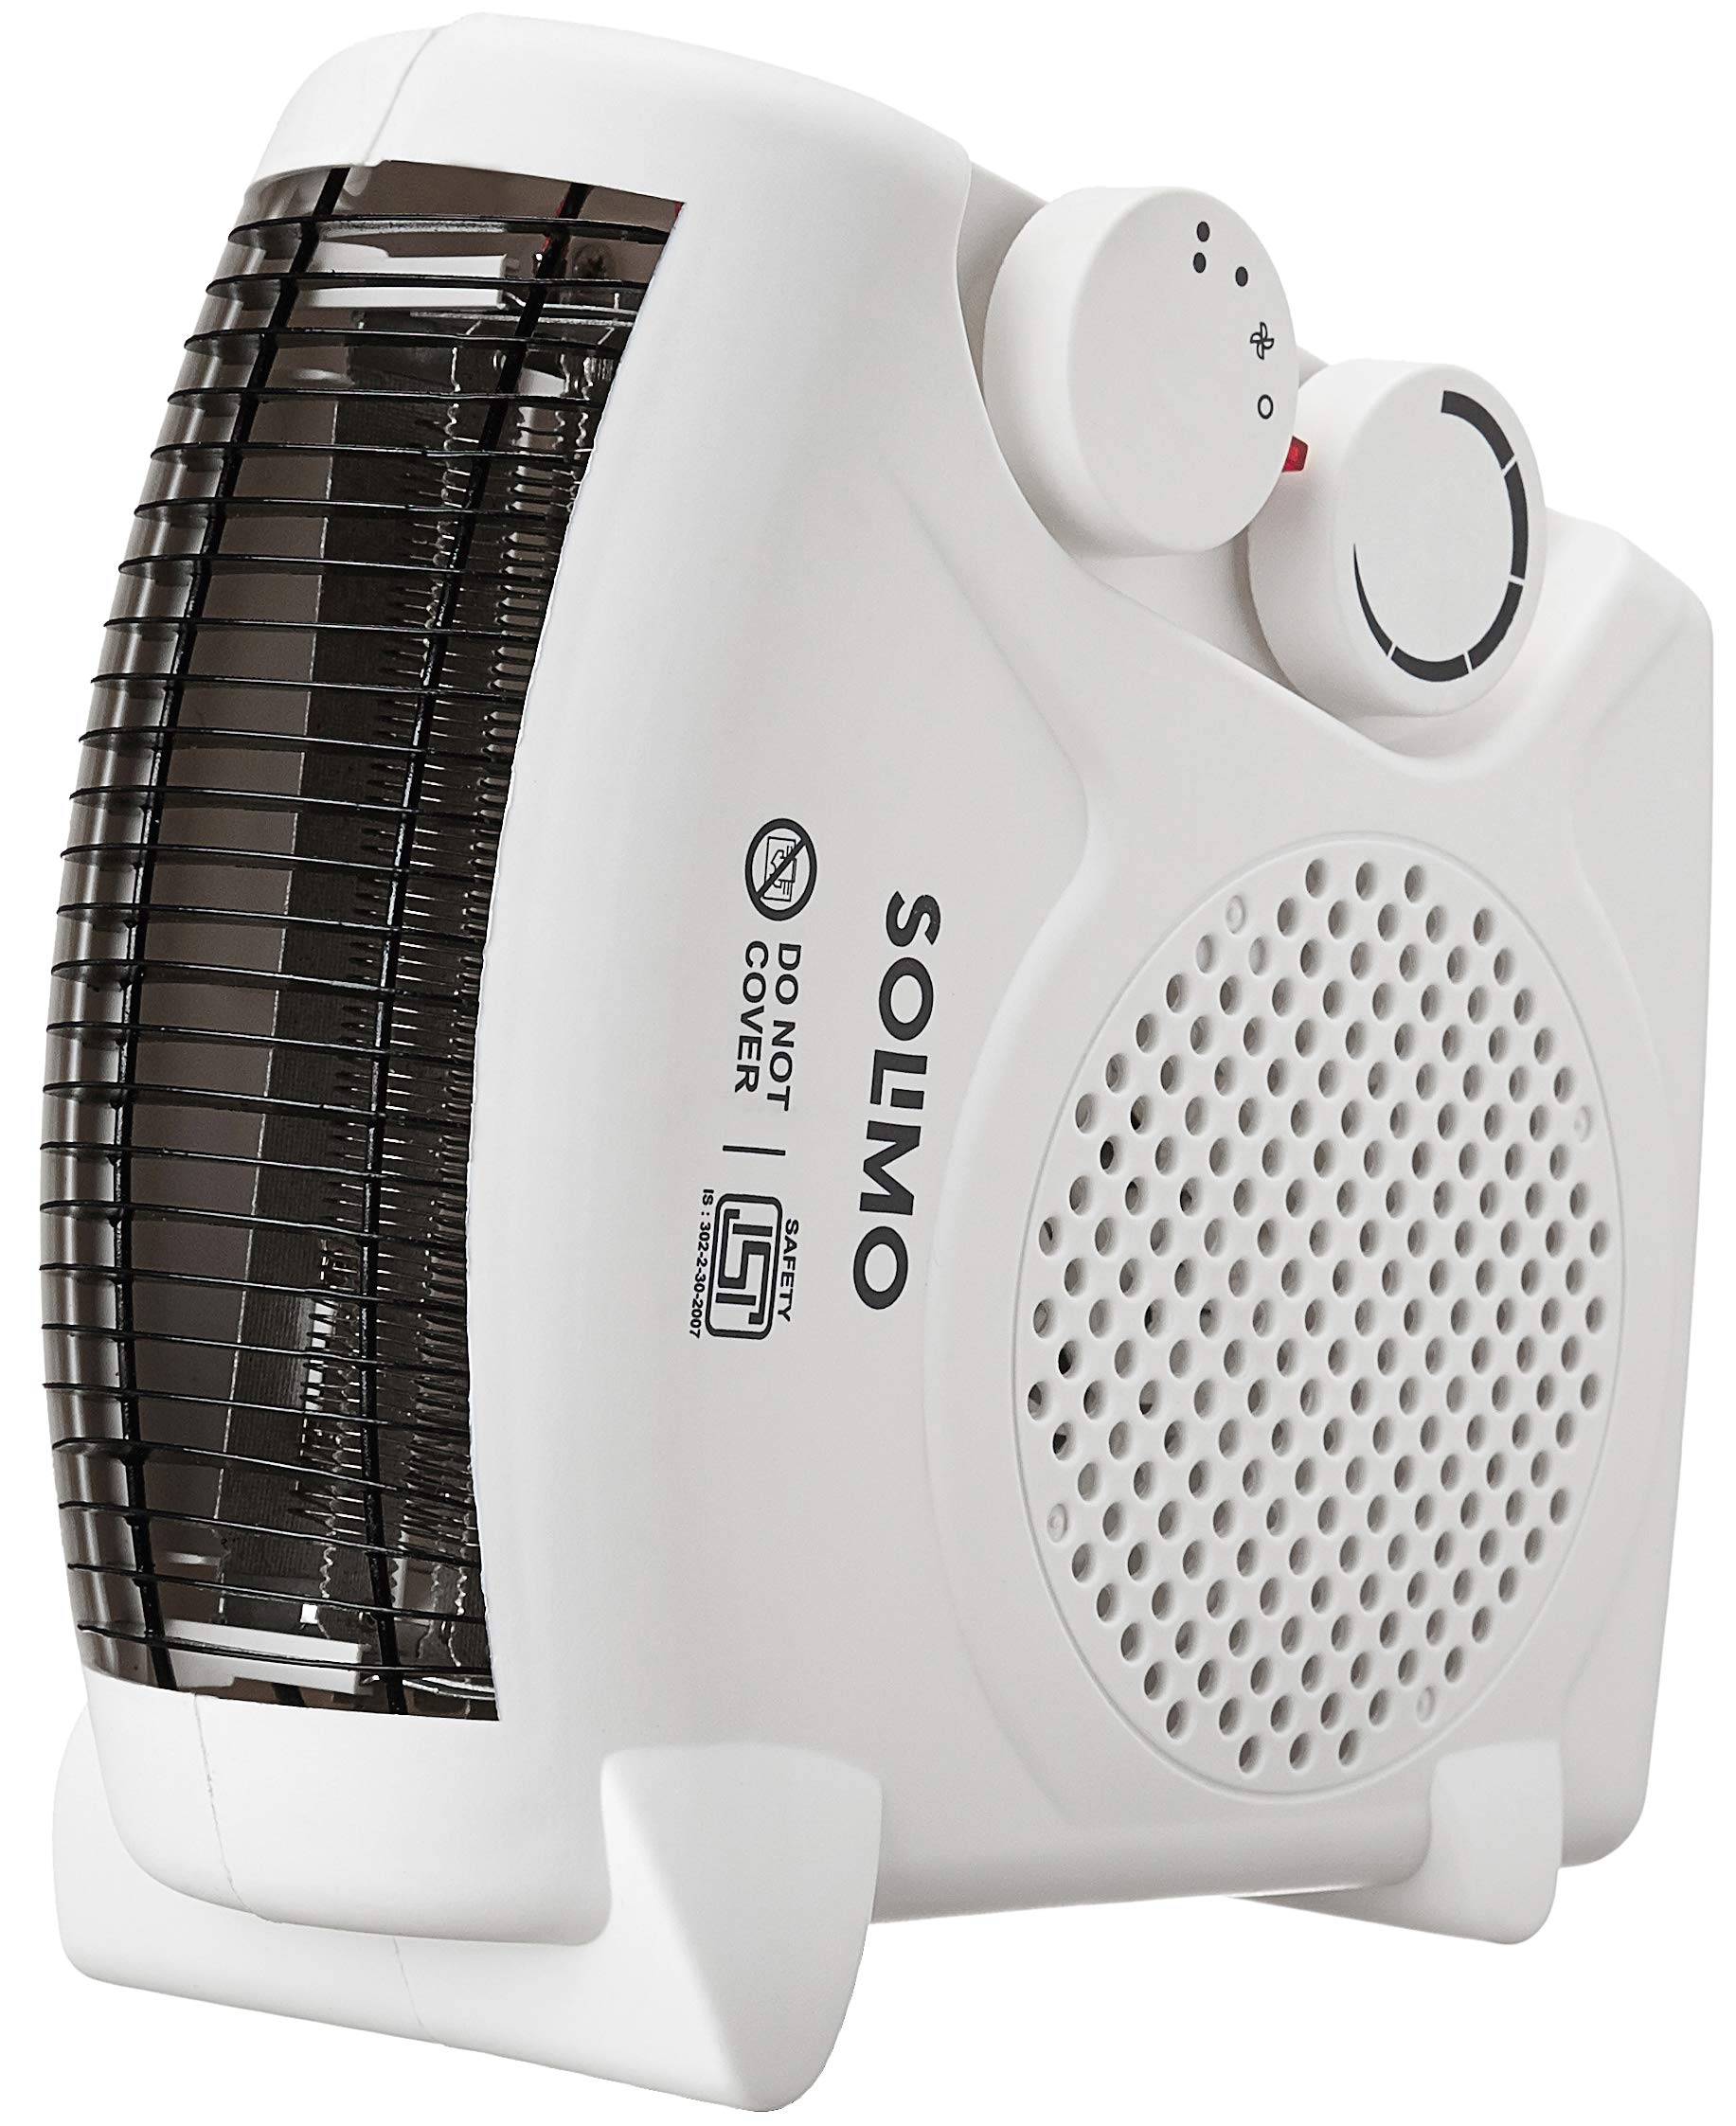 Amazon Brand - Solimo 2000/1000 Watts Room Heater with Adjustable Thermostat (ISI certified, White colour, Ideal for small to medium room/area)